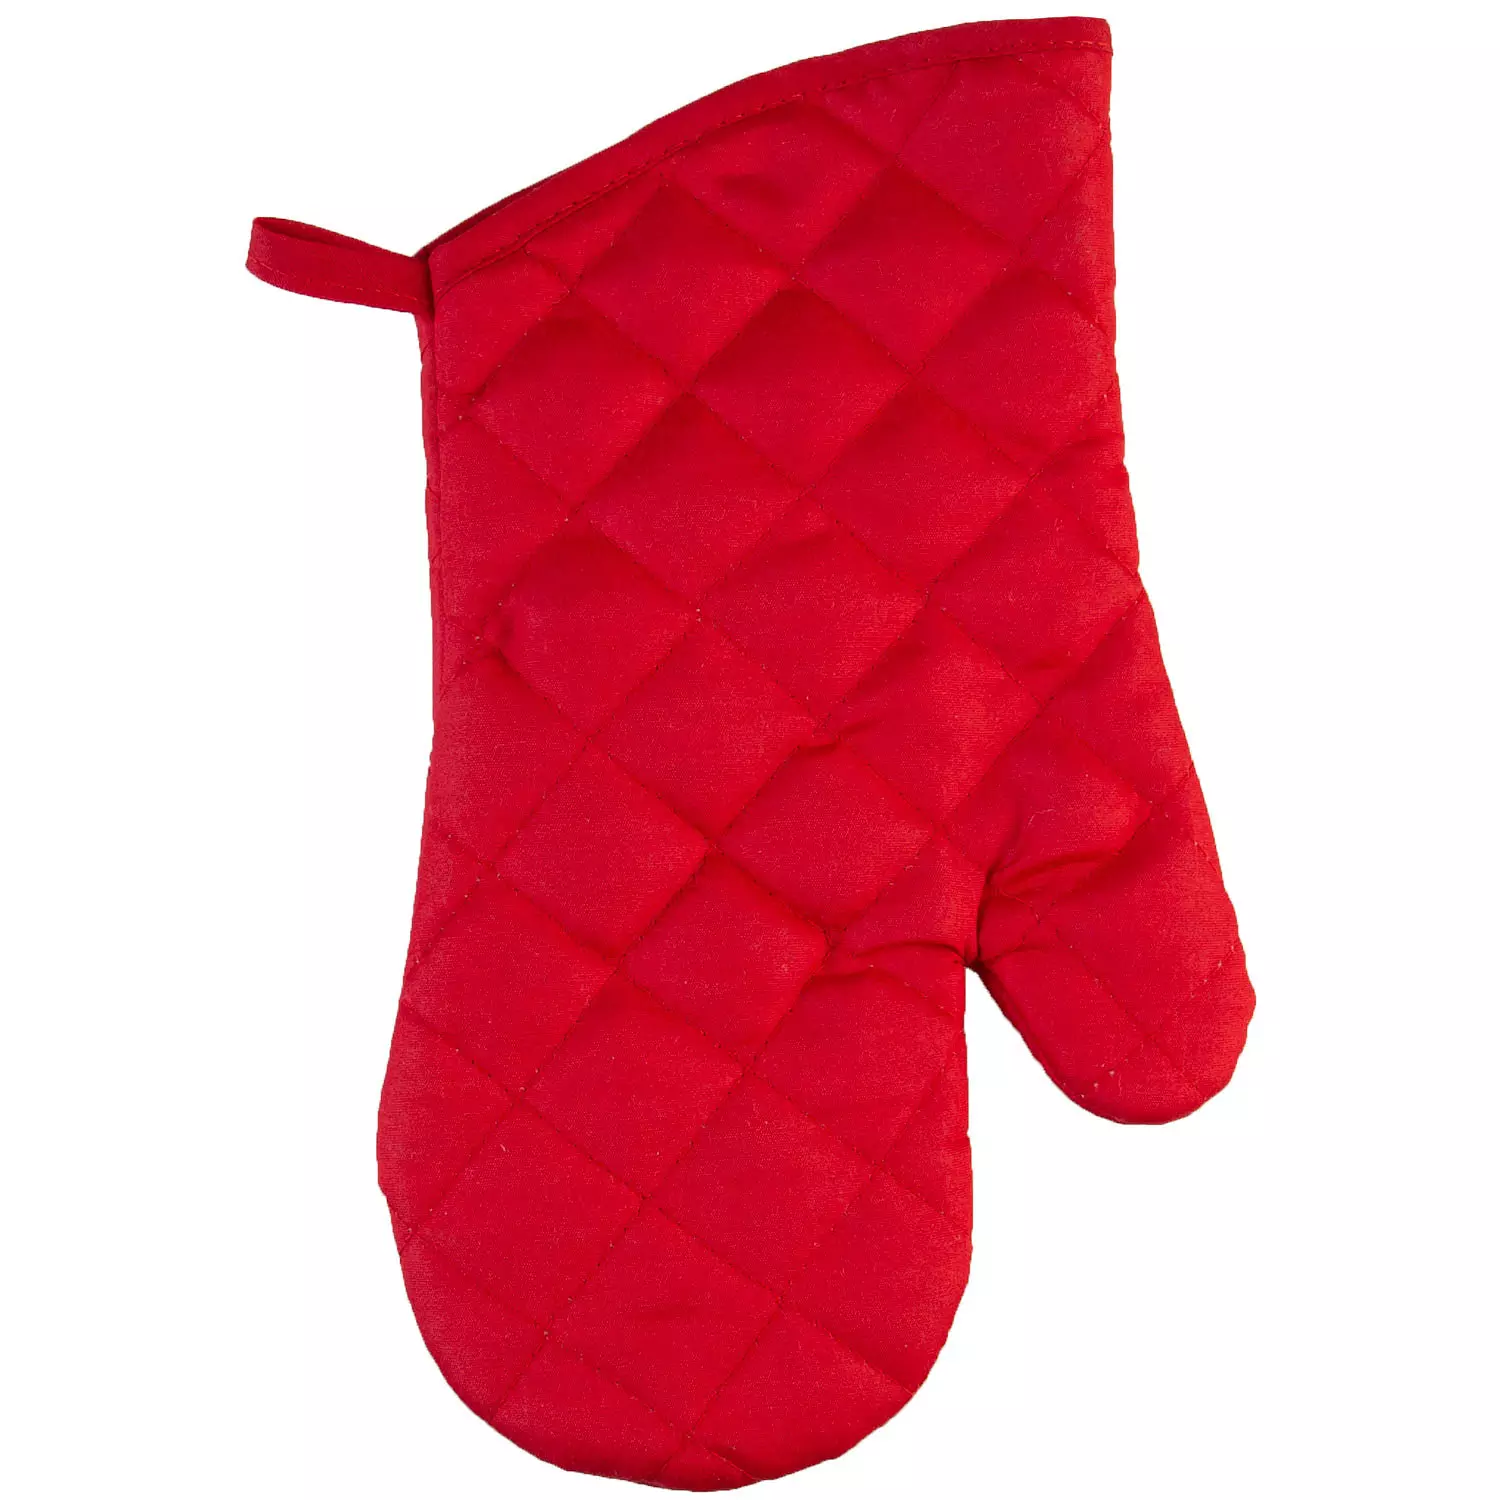 Cotton Concepts - Heat resistant oven mitt, red